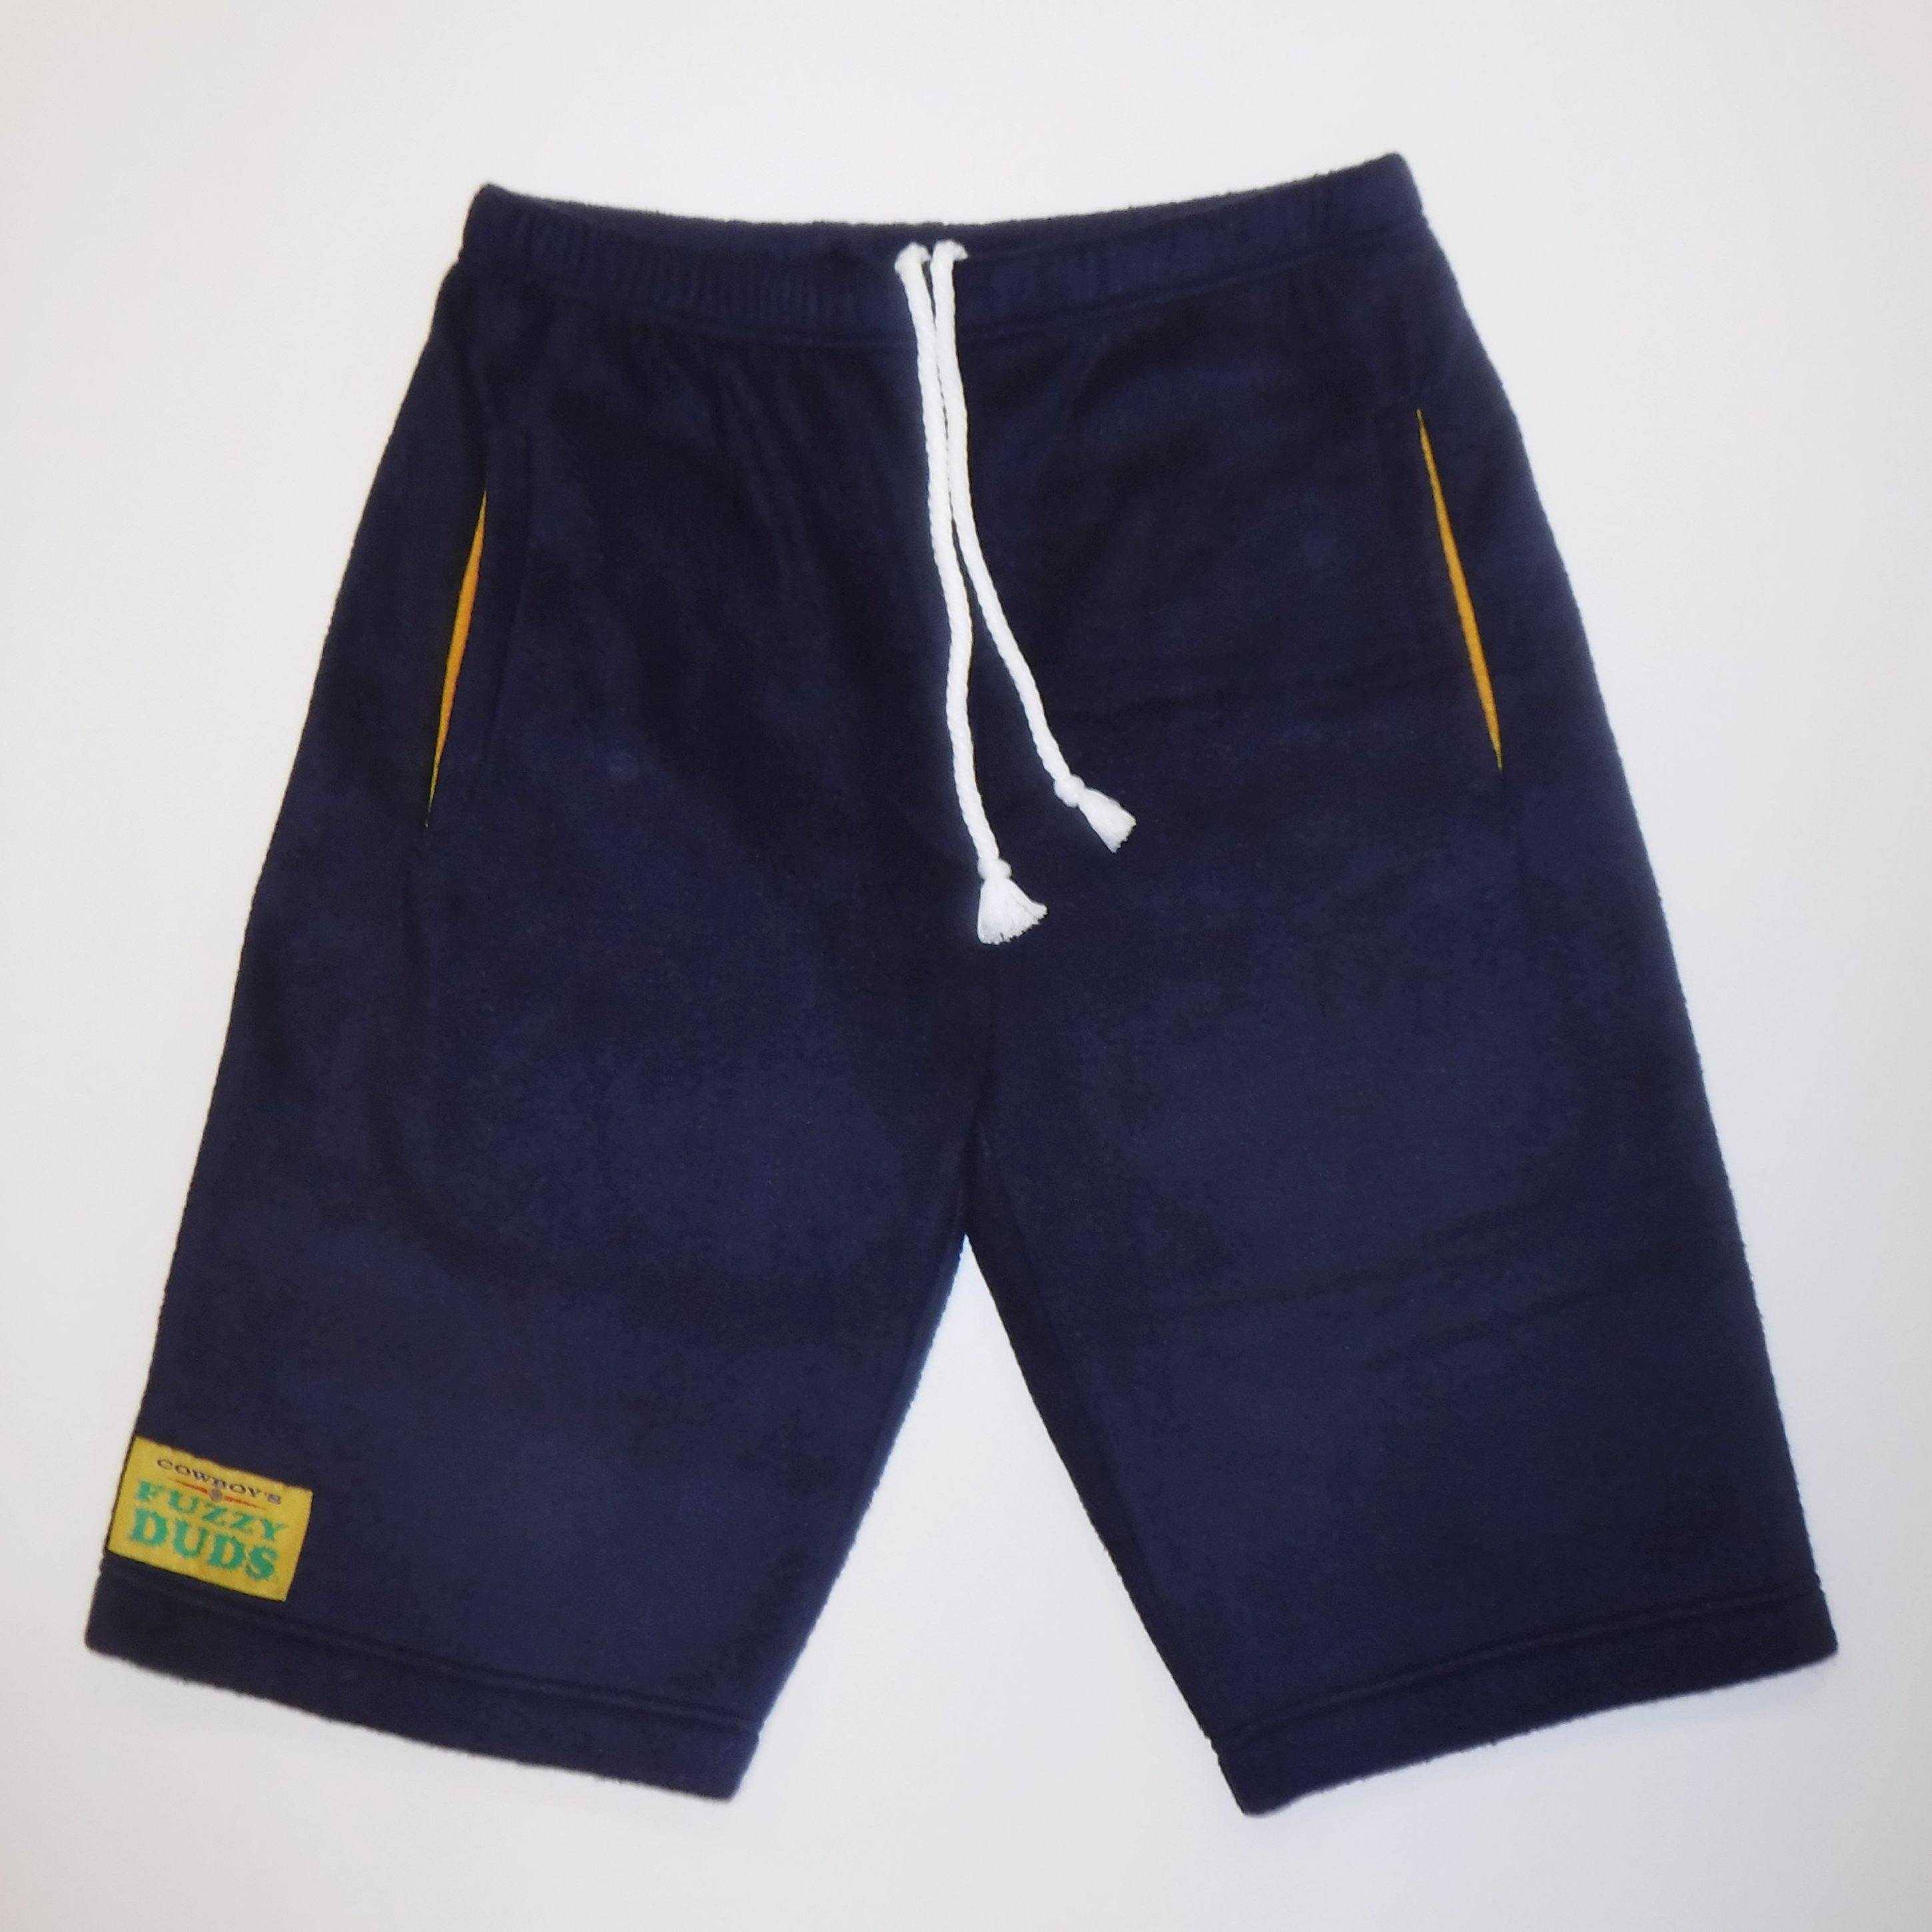 Mens - Navy with Yellow Pockets - Fuzzy Duds